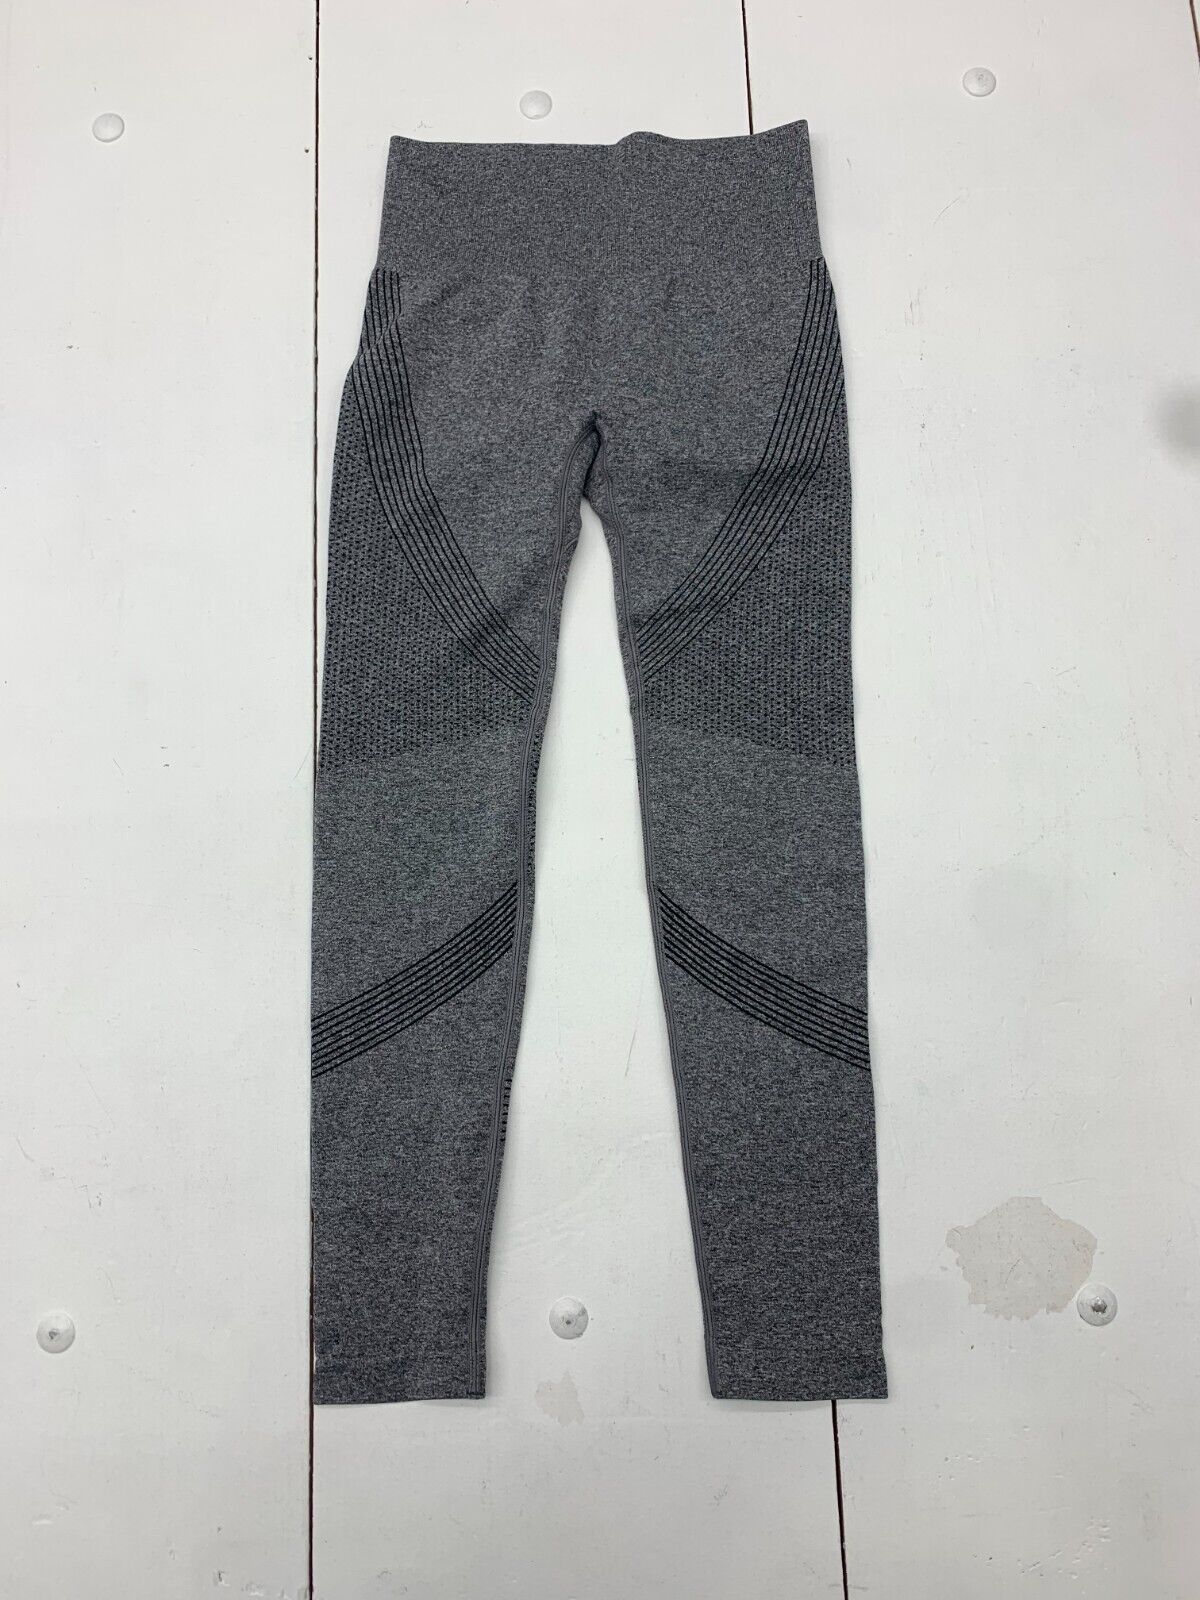 Womens Grey Athletic Compression Leggings Size Small